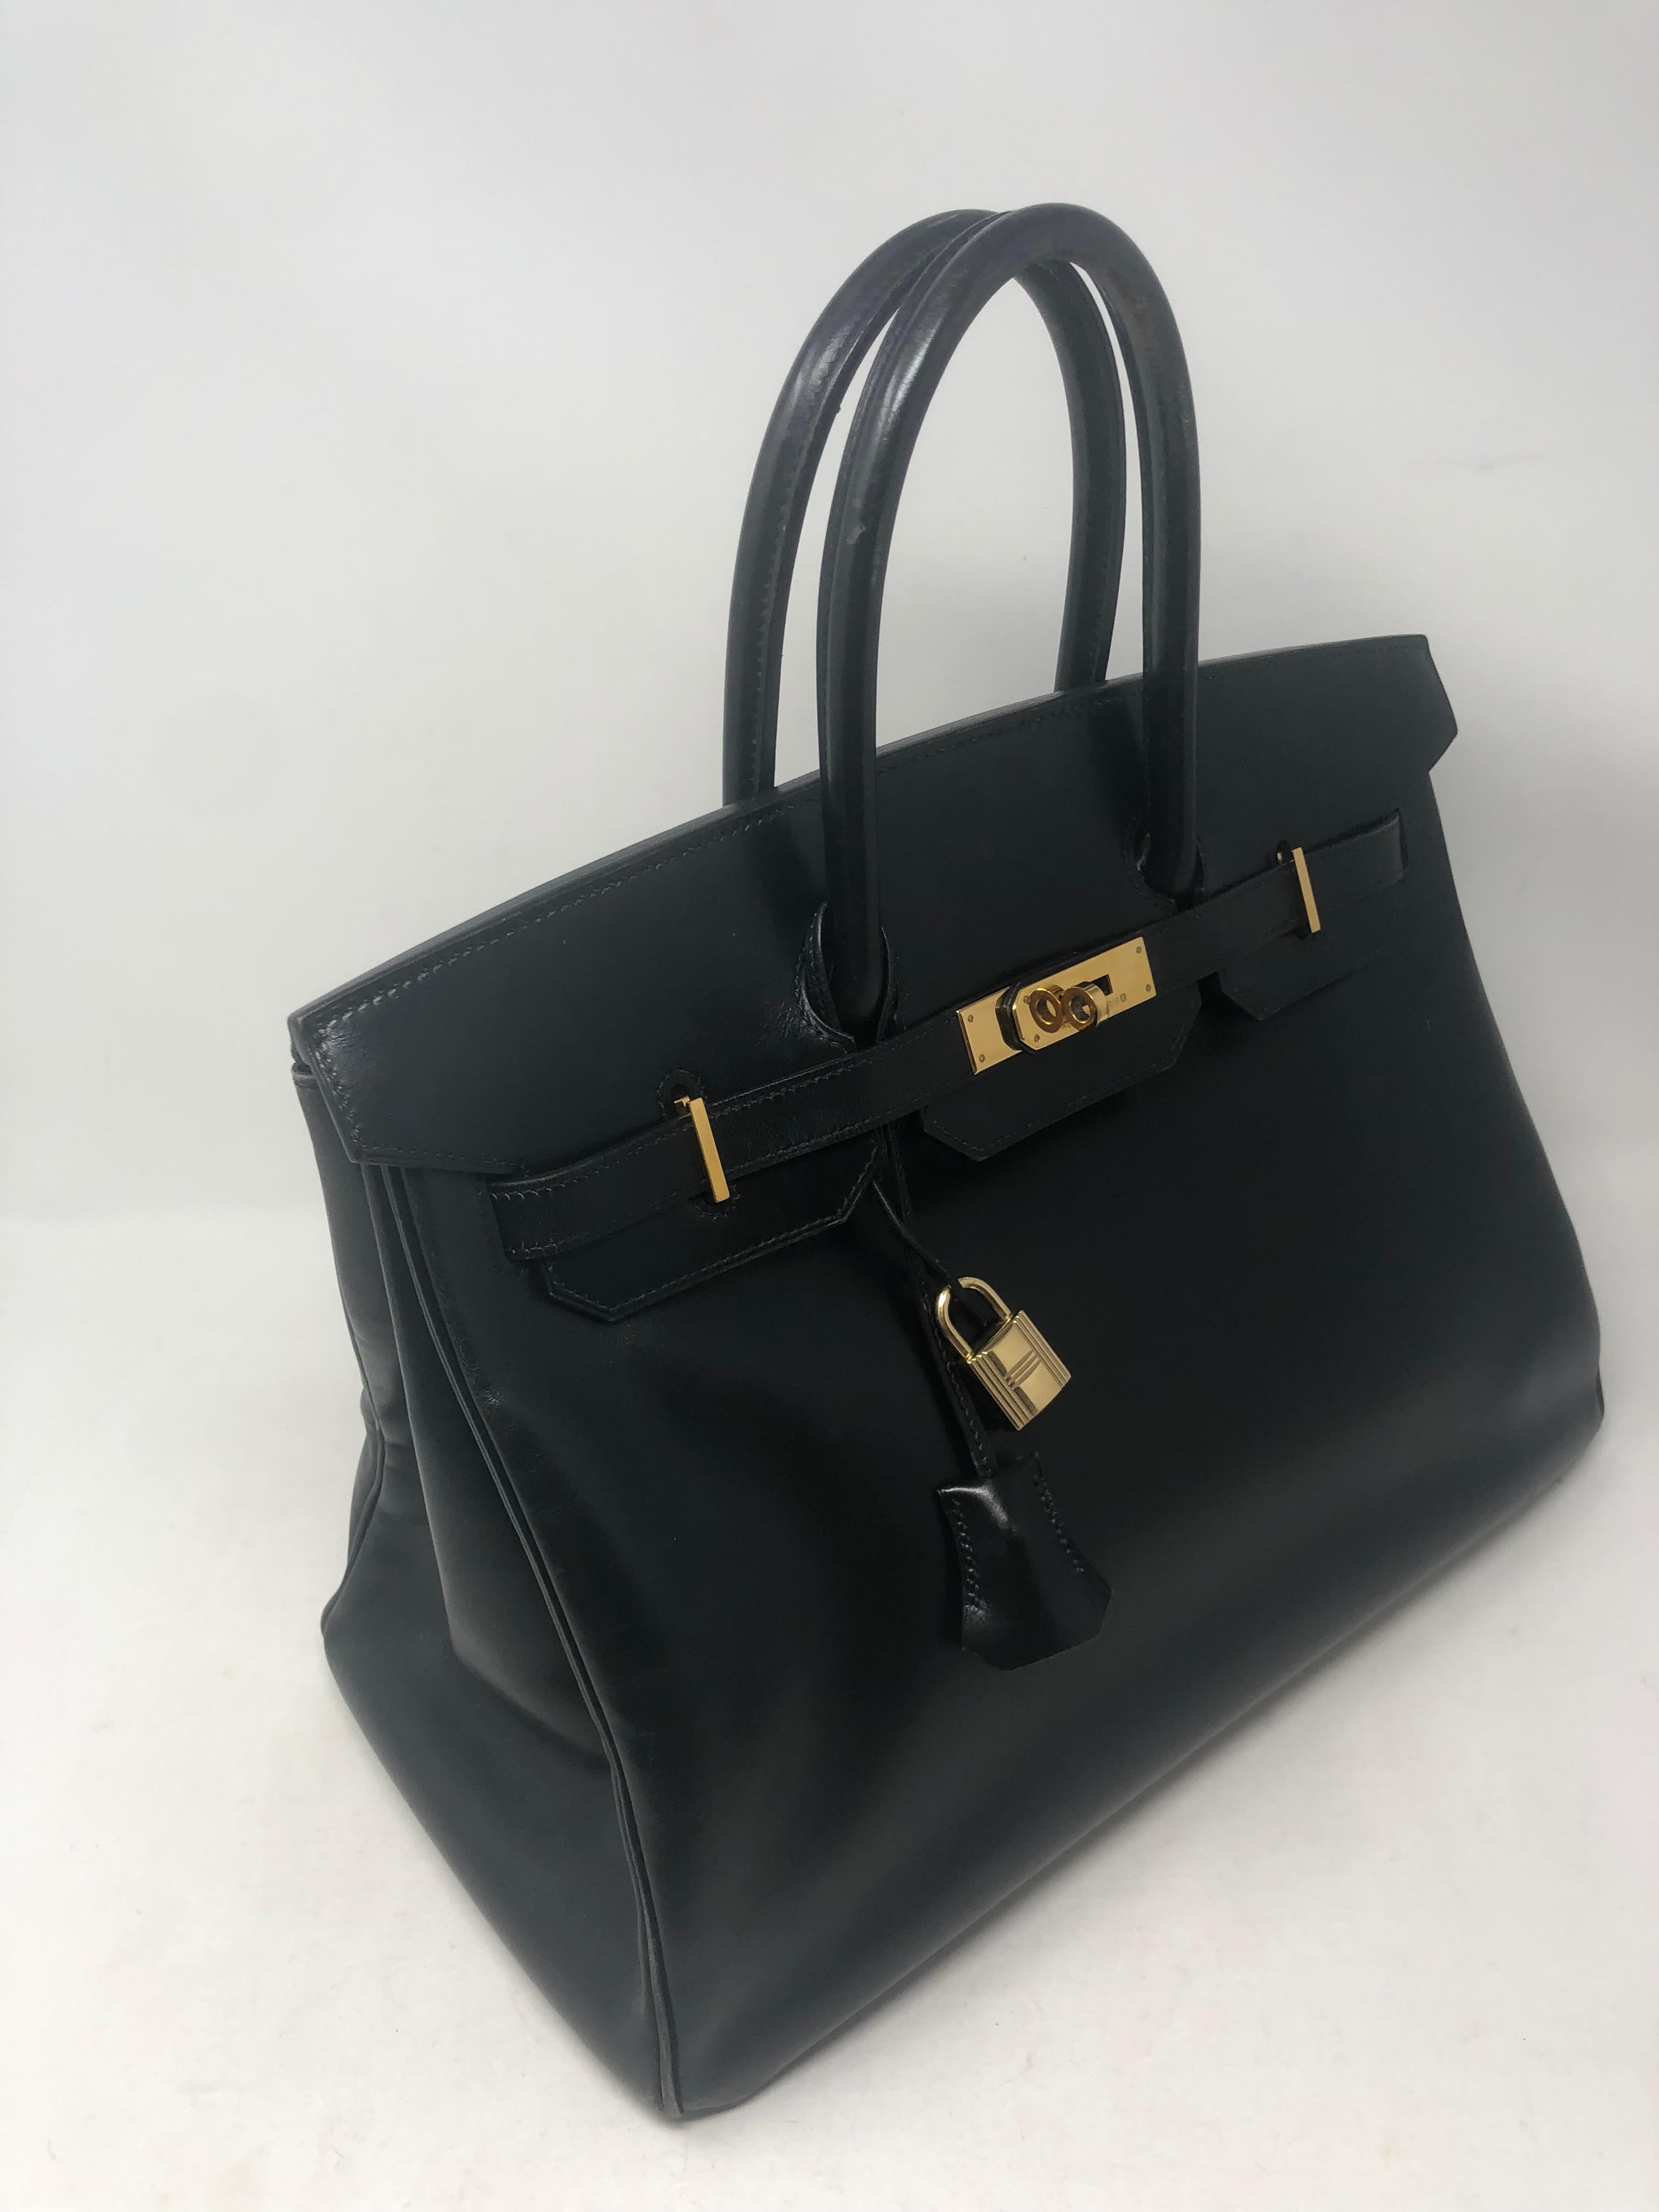 Hermes Black Birkin 35 Swift Leather. Gold hardware. Vintage and good condition. Wear on corners. Lots of life left. Beautiful smooth swift leather. Interior clean and no odors. Includes clochette, lock, keys and dust cover. Guaranteed authentic. 